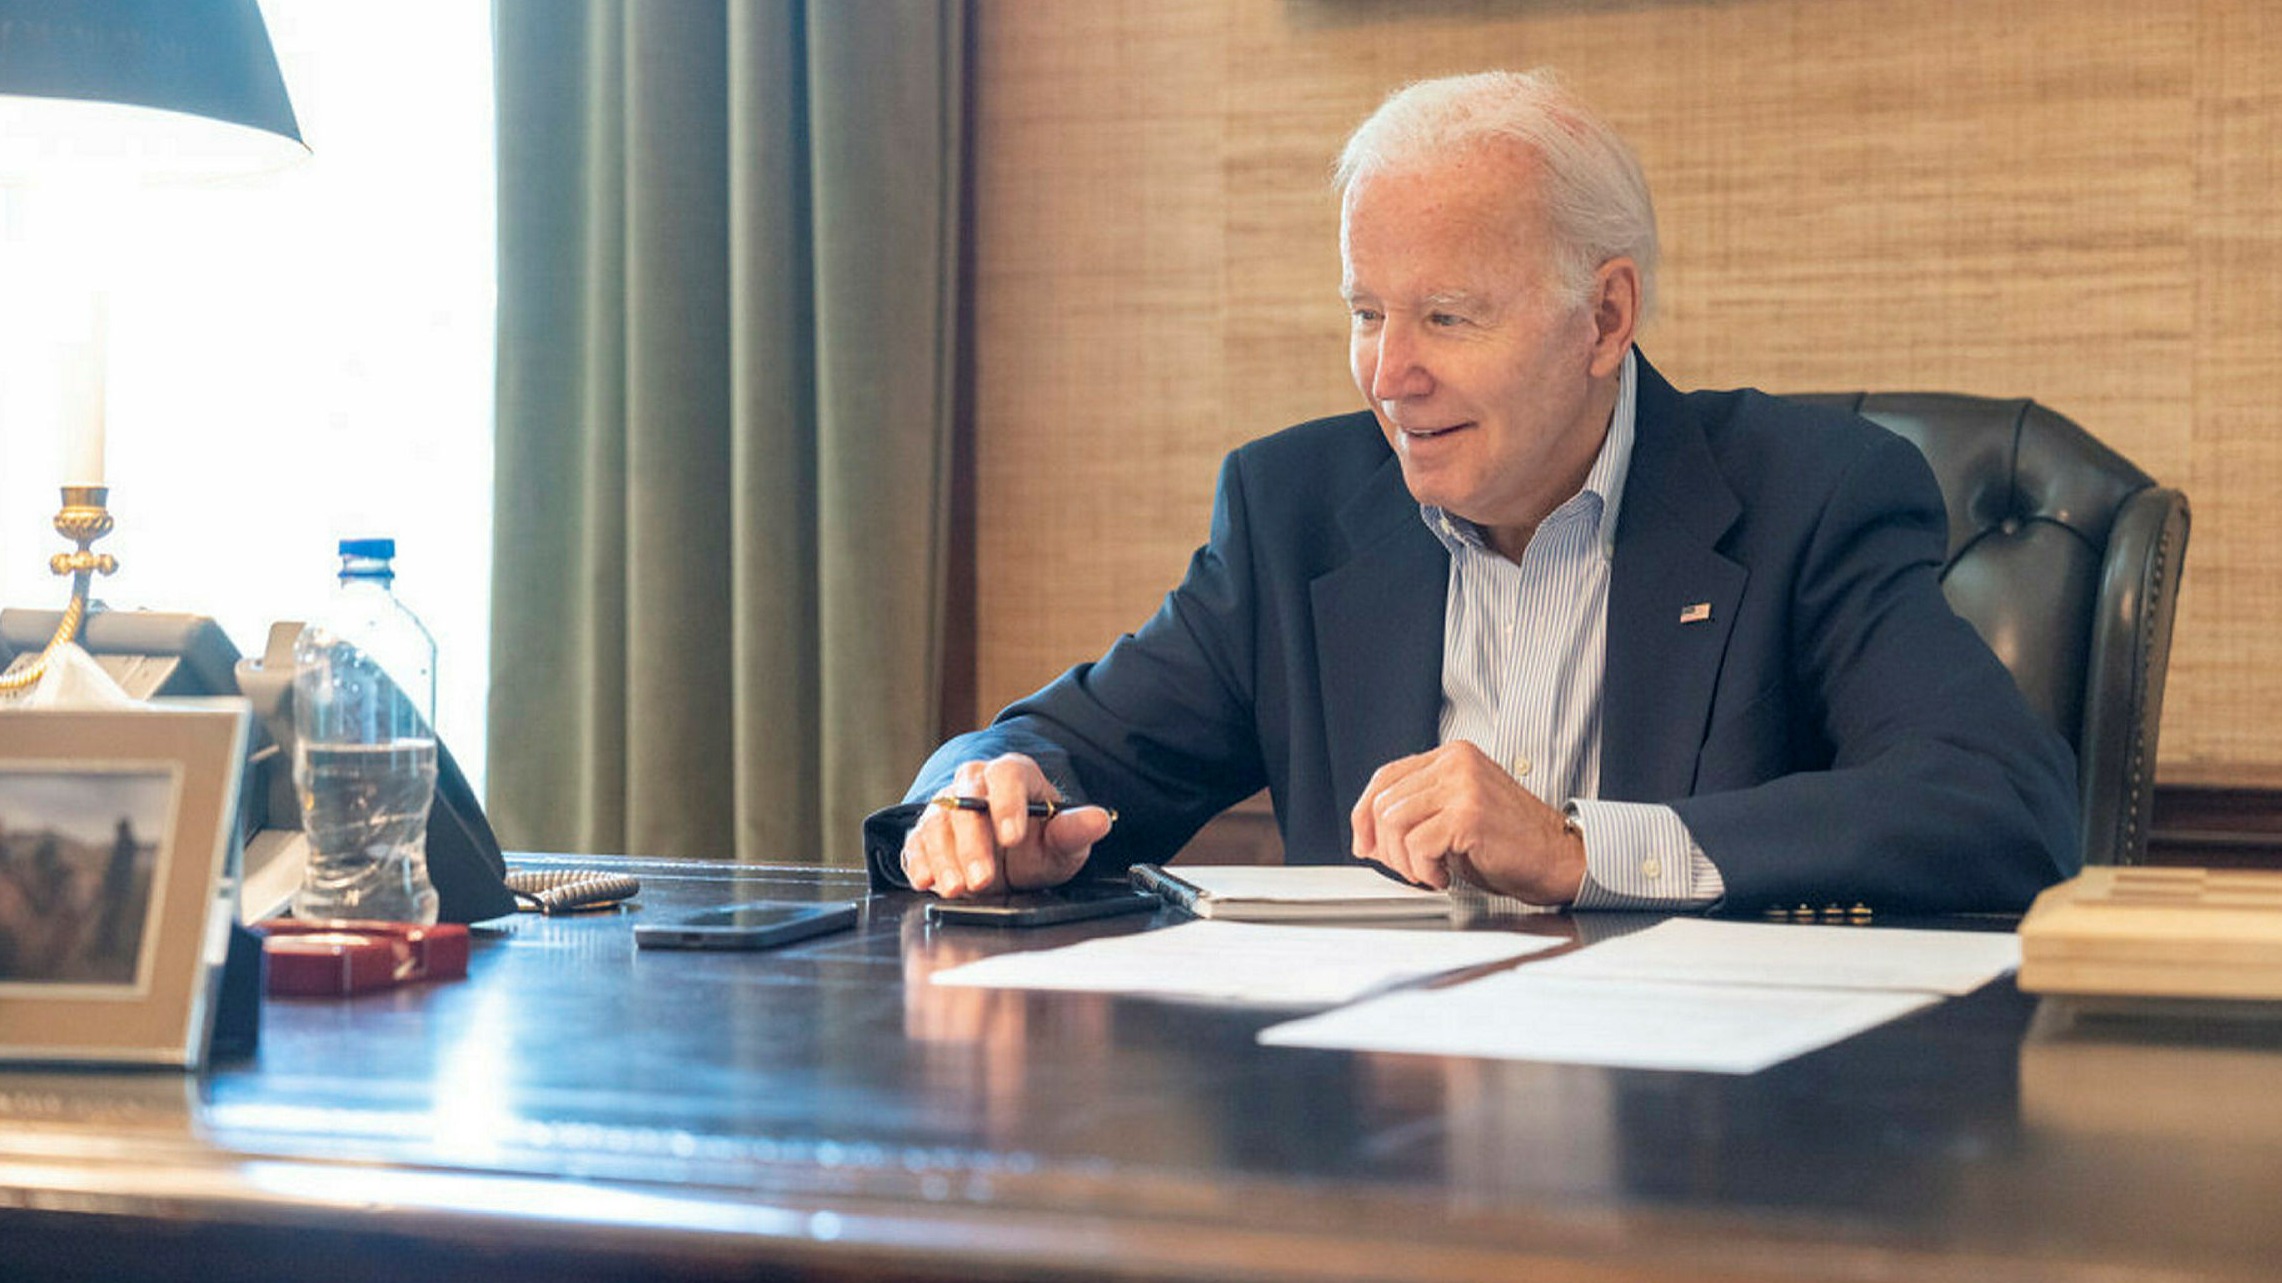 Joe Biden has contracted Covid, White House says | Financial Times